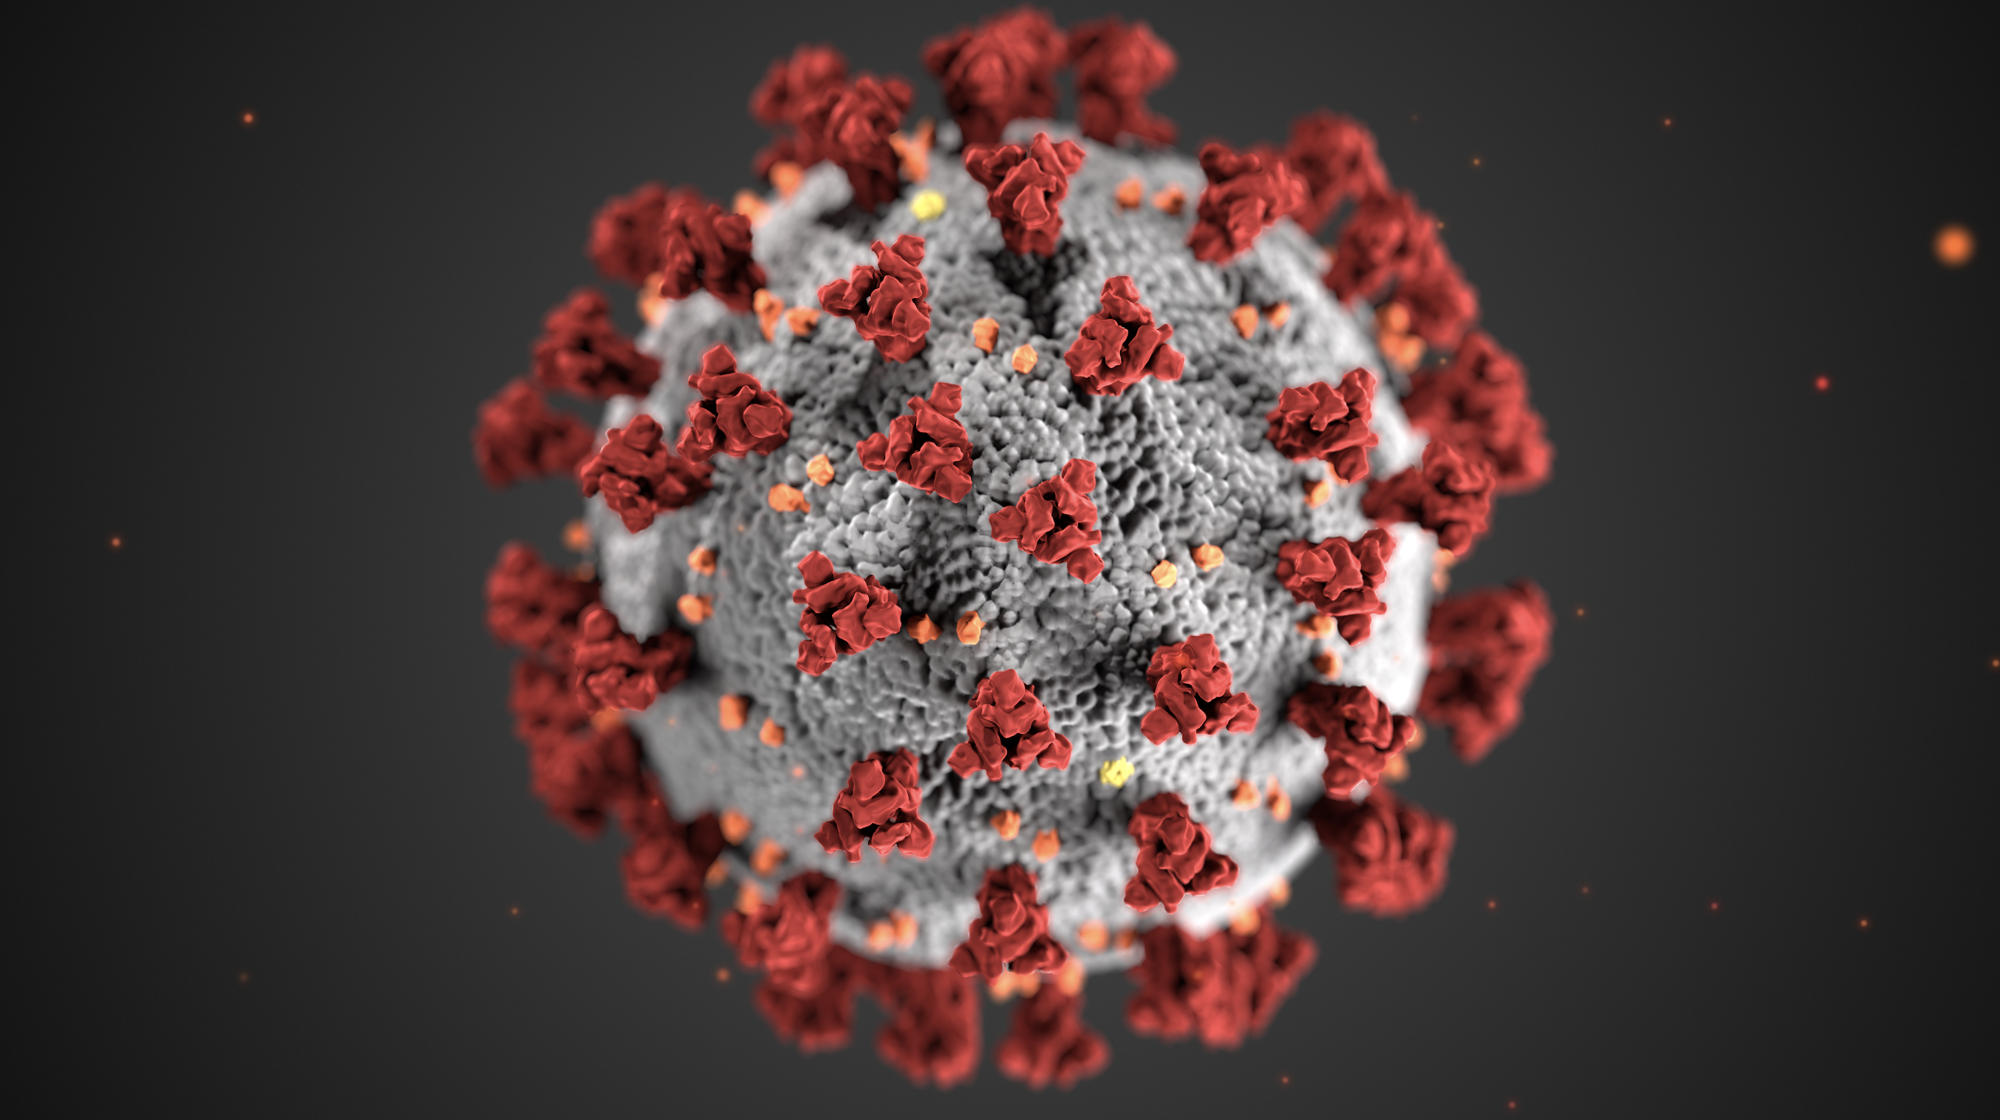 A novel coronavirus was identified as the cause of an outbreak of respiratory illness first detected in Wuhan, China in 2019, the CDC reported. Illustration courtesy of the CDC